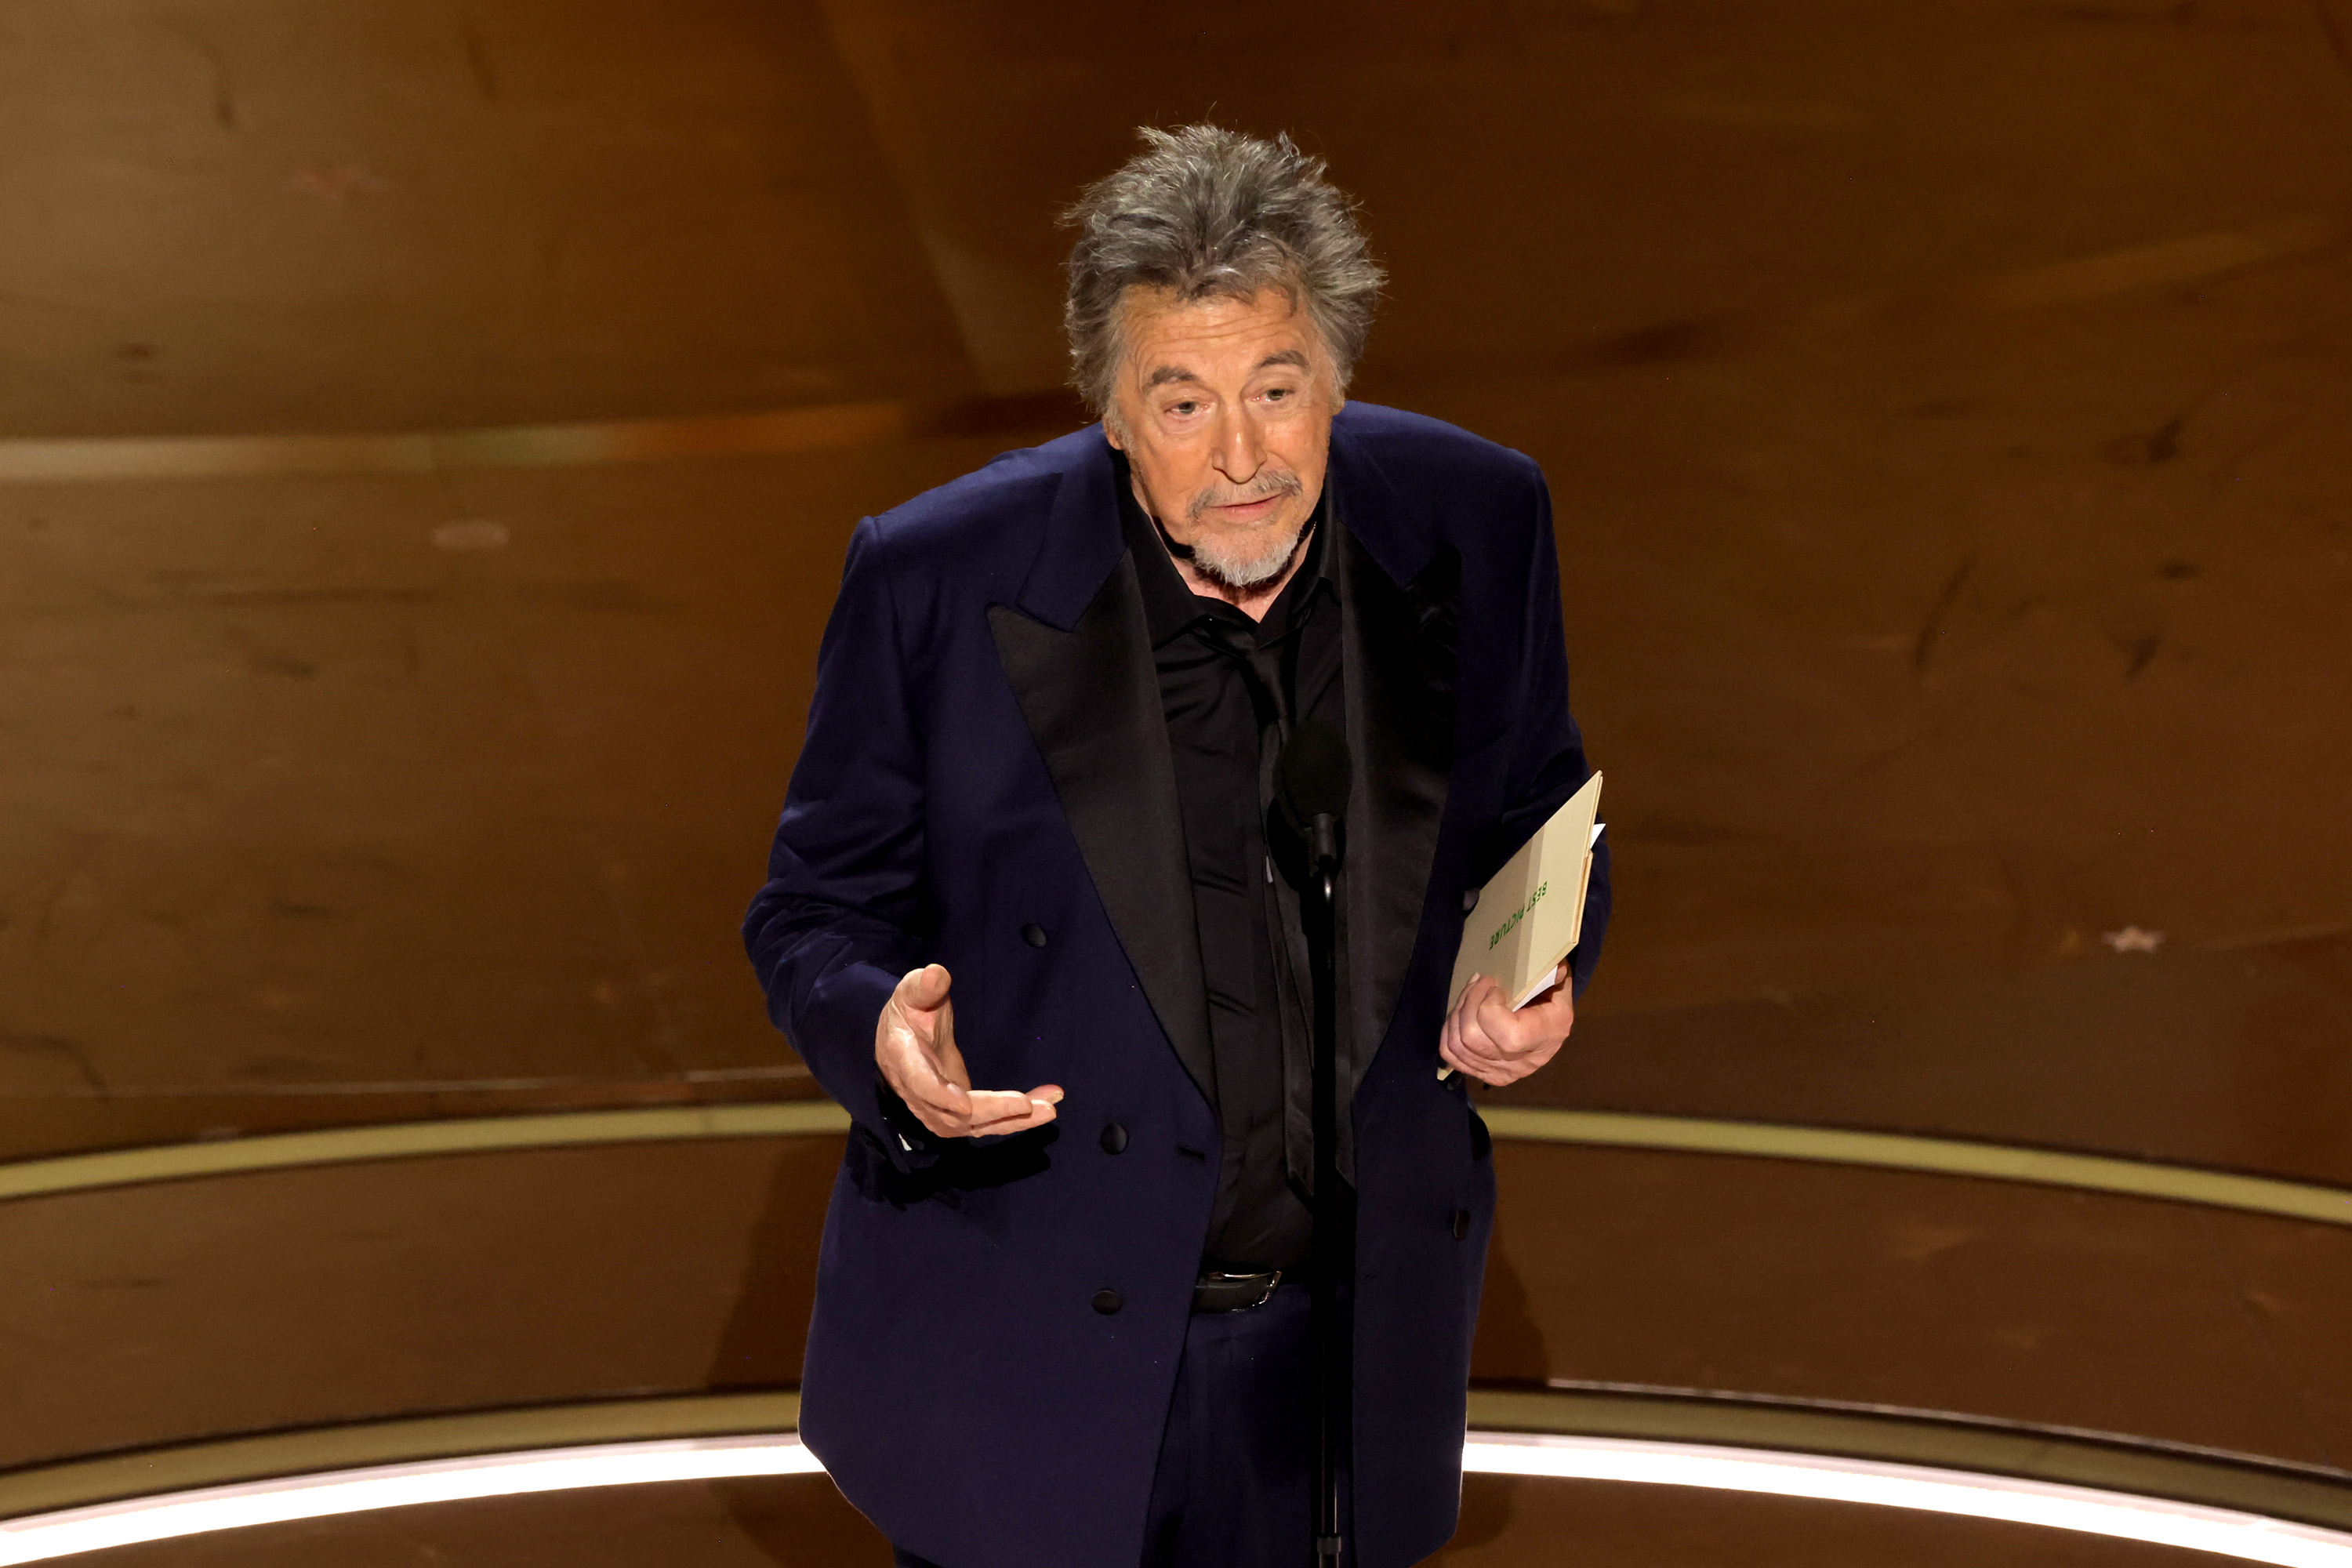 Man in a dark suit presenting on stage at an awards ceremony